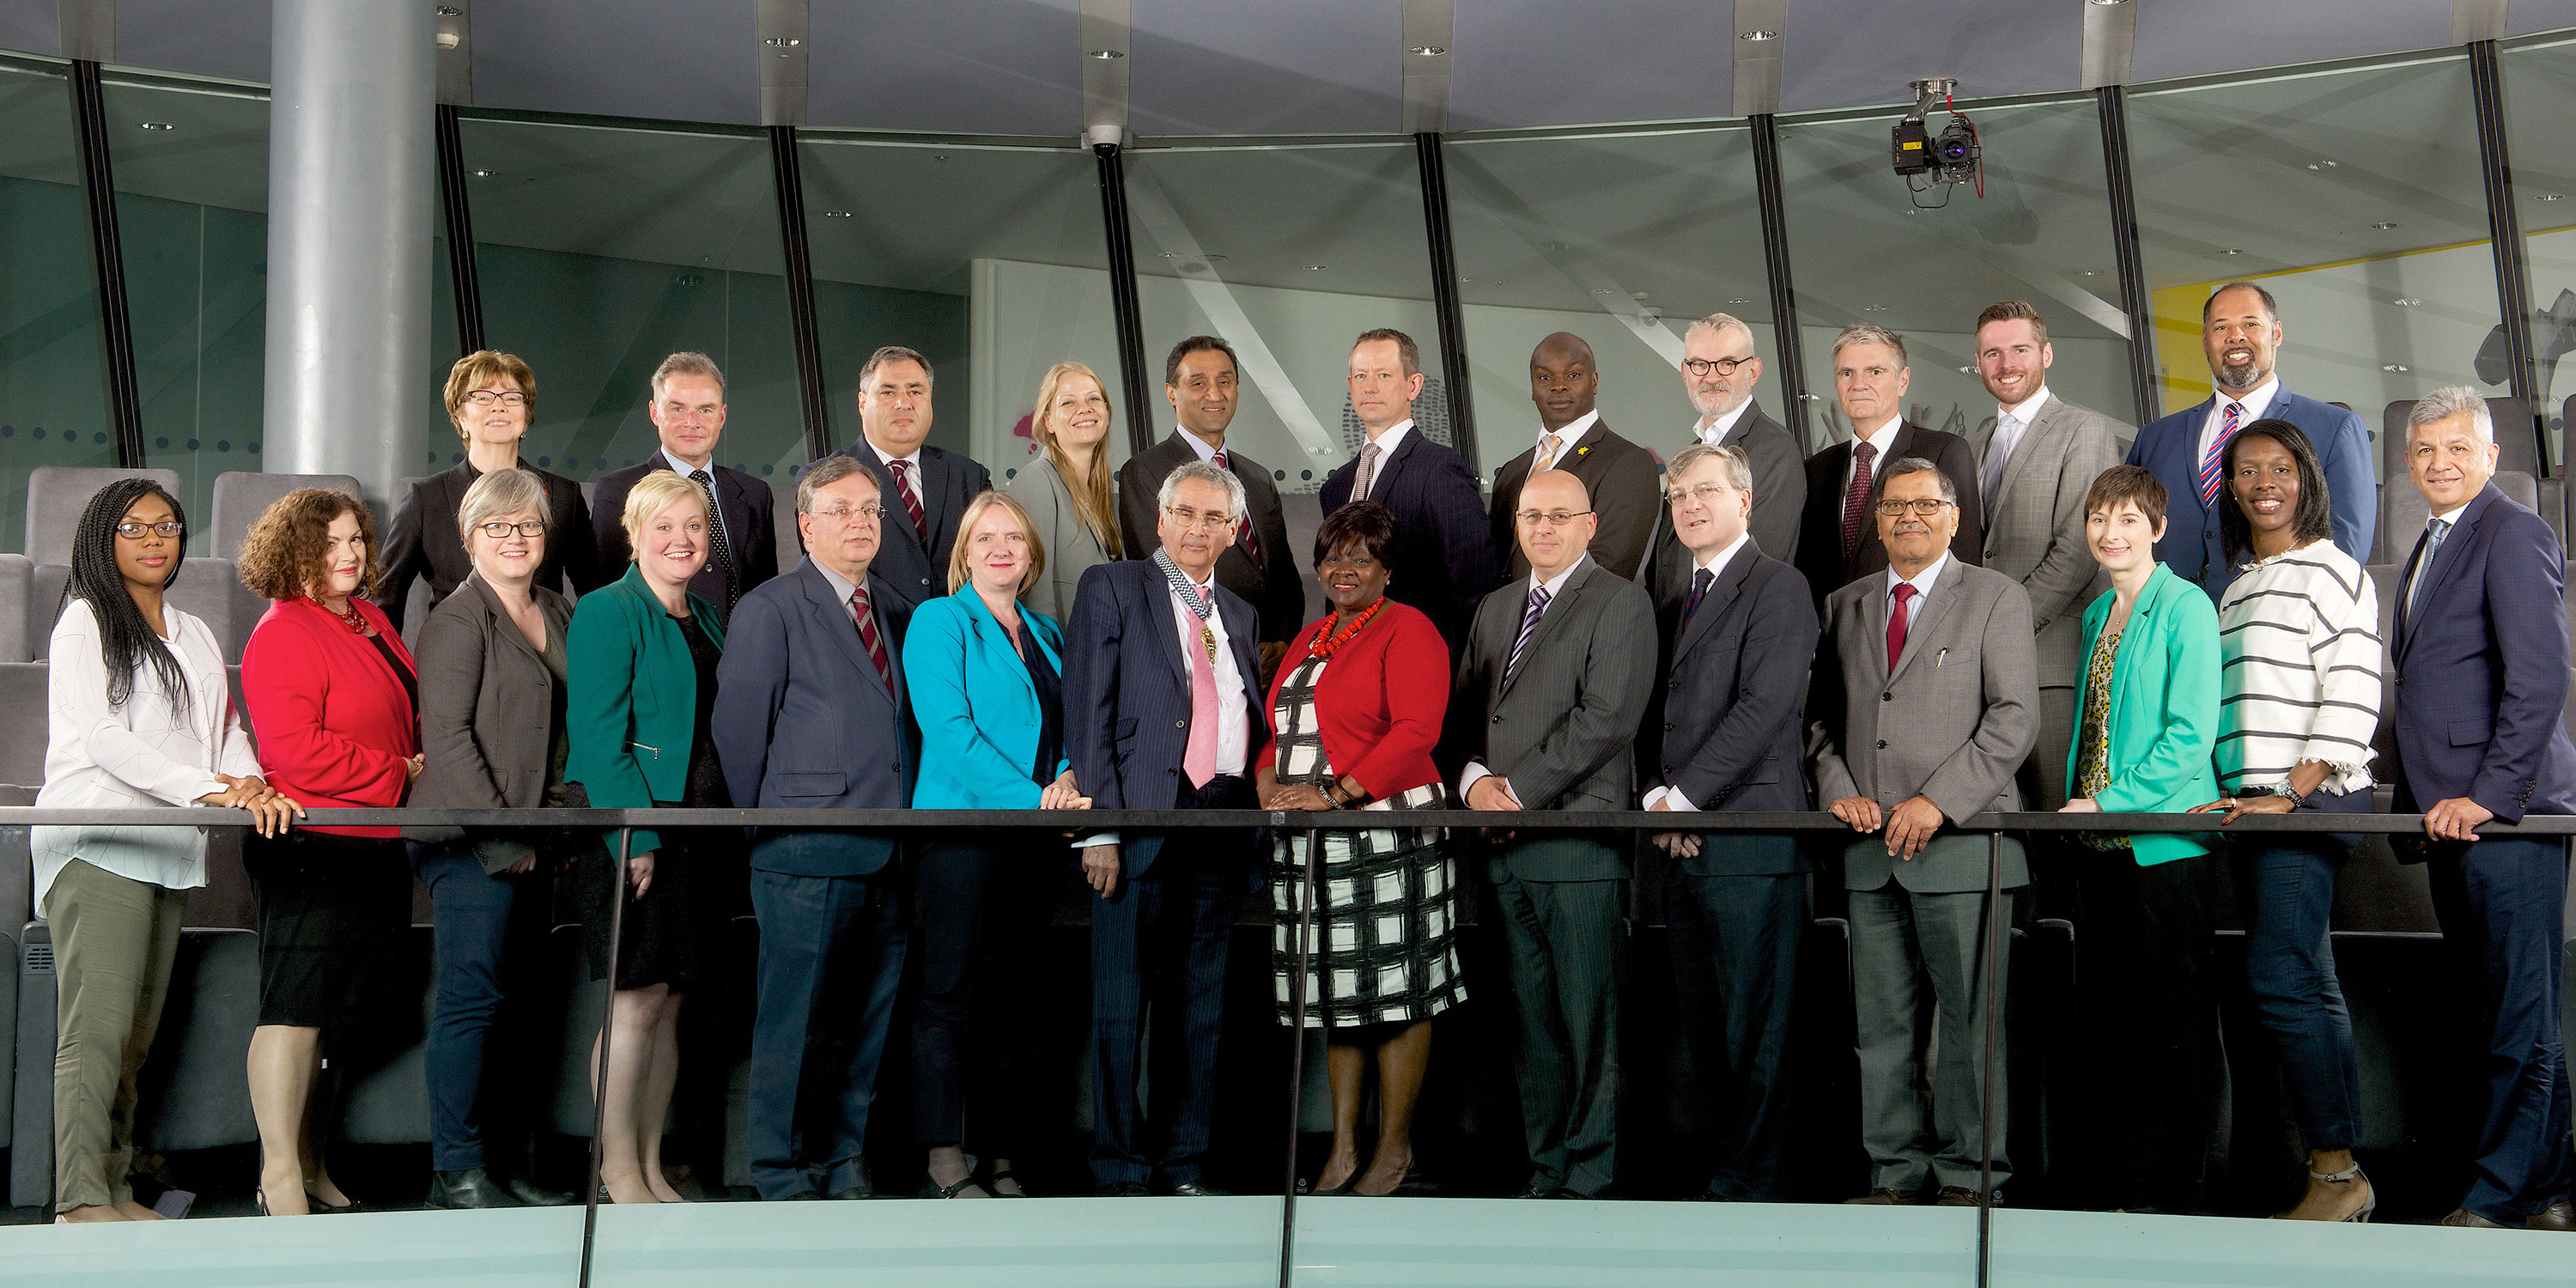 New Assembly Members get ready for first PQT London City Hall